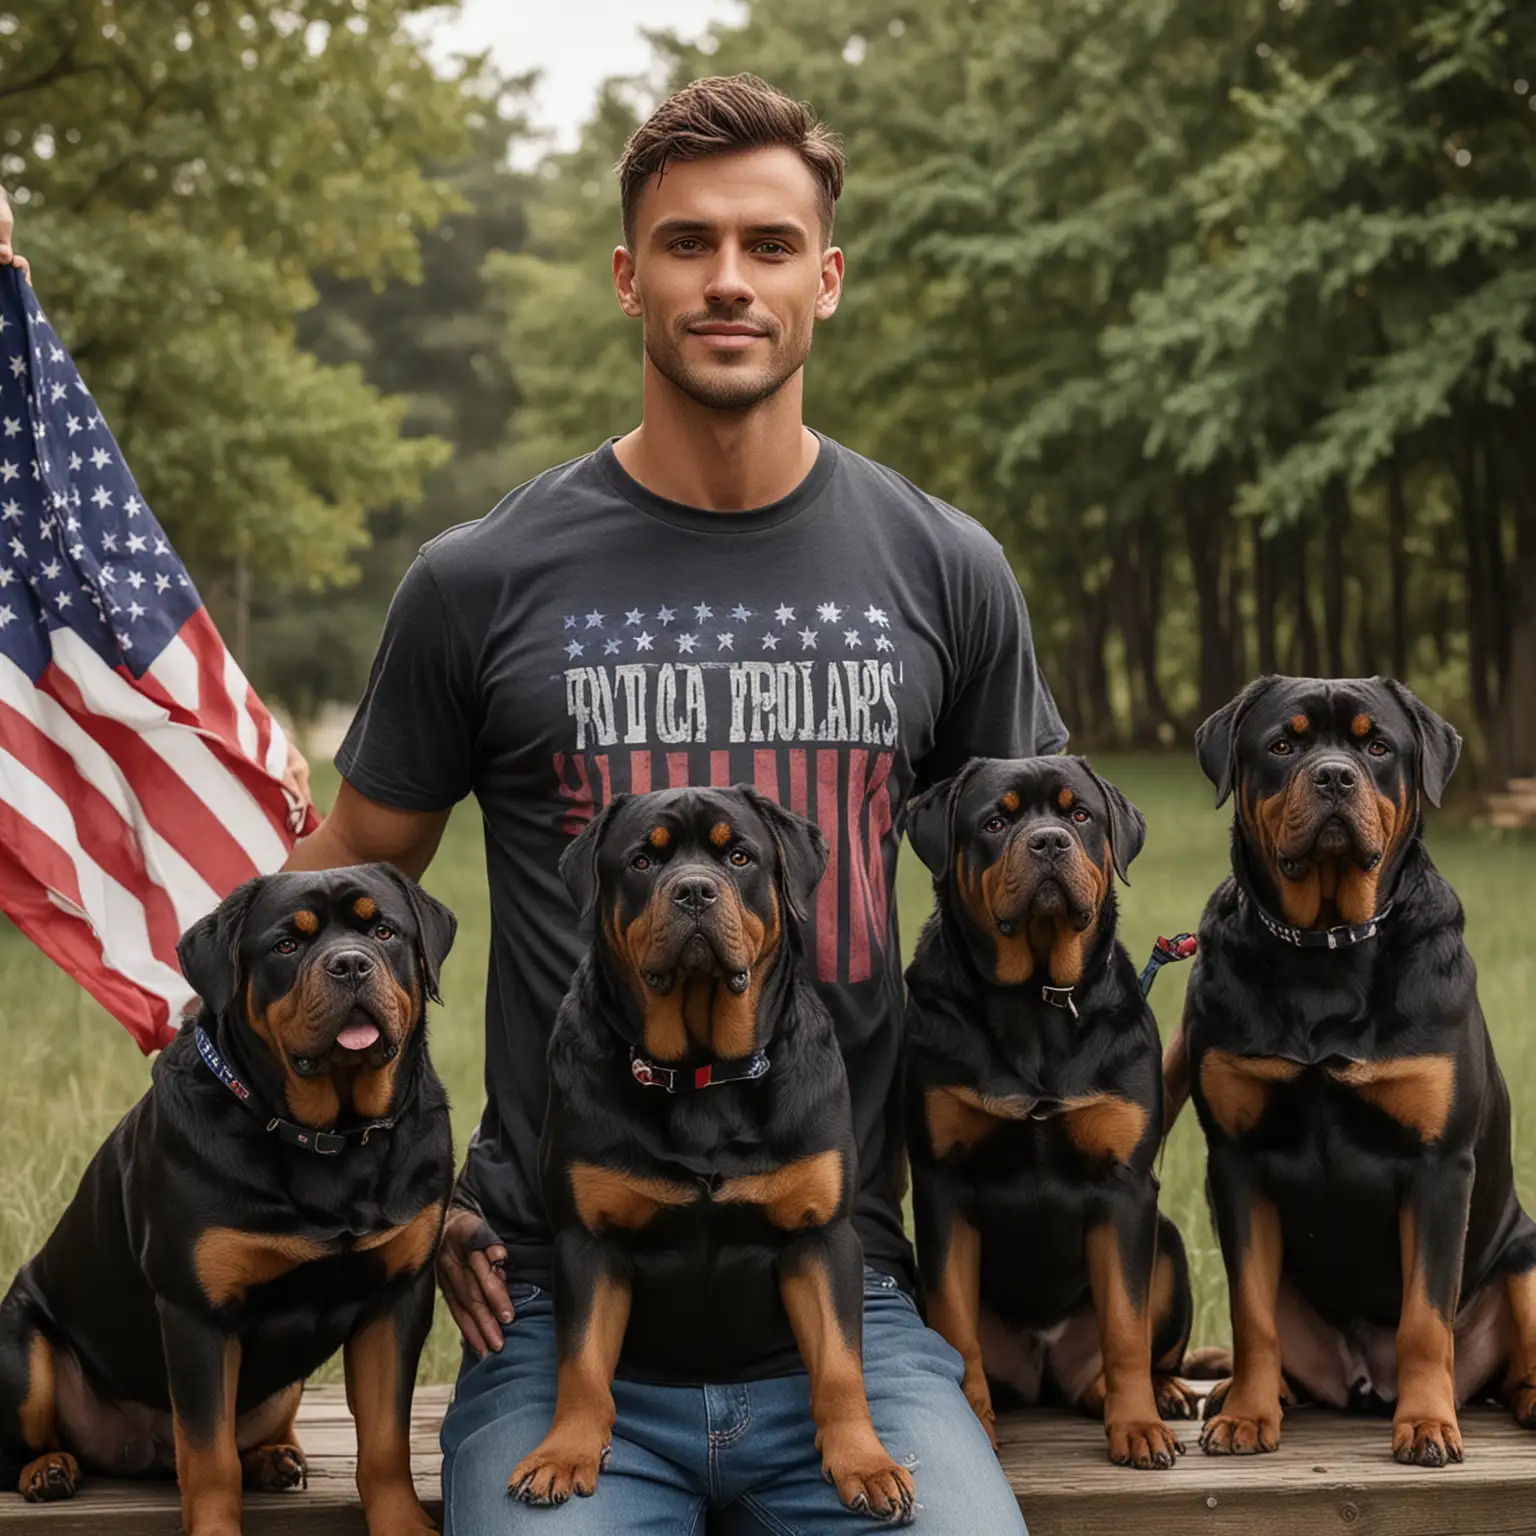 A handsome man, with a T-shirt with an American Flag on it, outdoors with 2 rottweilers